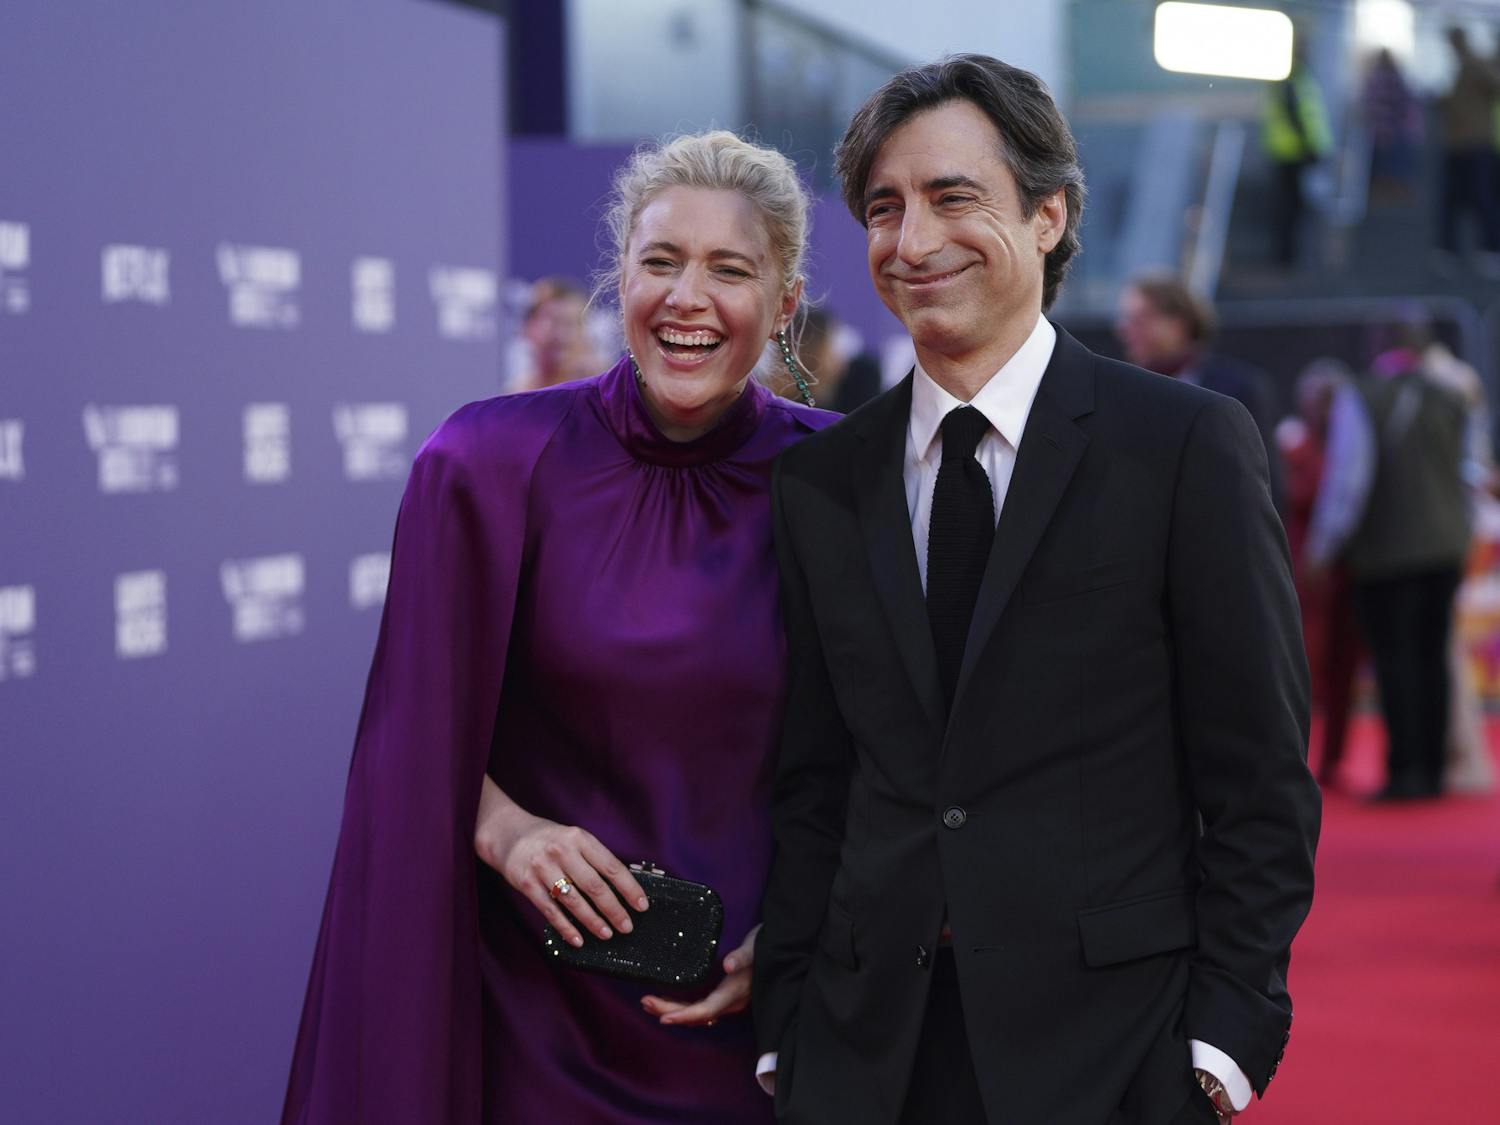 Greta Gerwig, left, and director Noah Baumbach pose for photographers upon arrival for the premiere of the film &#x27;White Noise&#x27; during the 2022 London Film Festival in London, Thursday, Oct. 6, 2022.